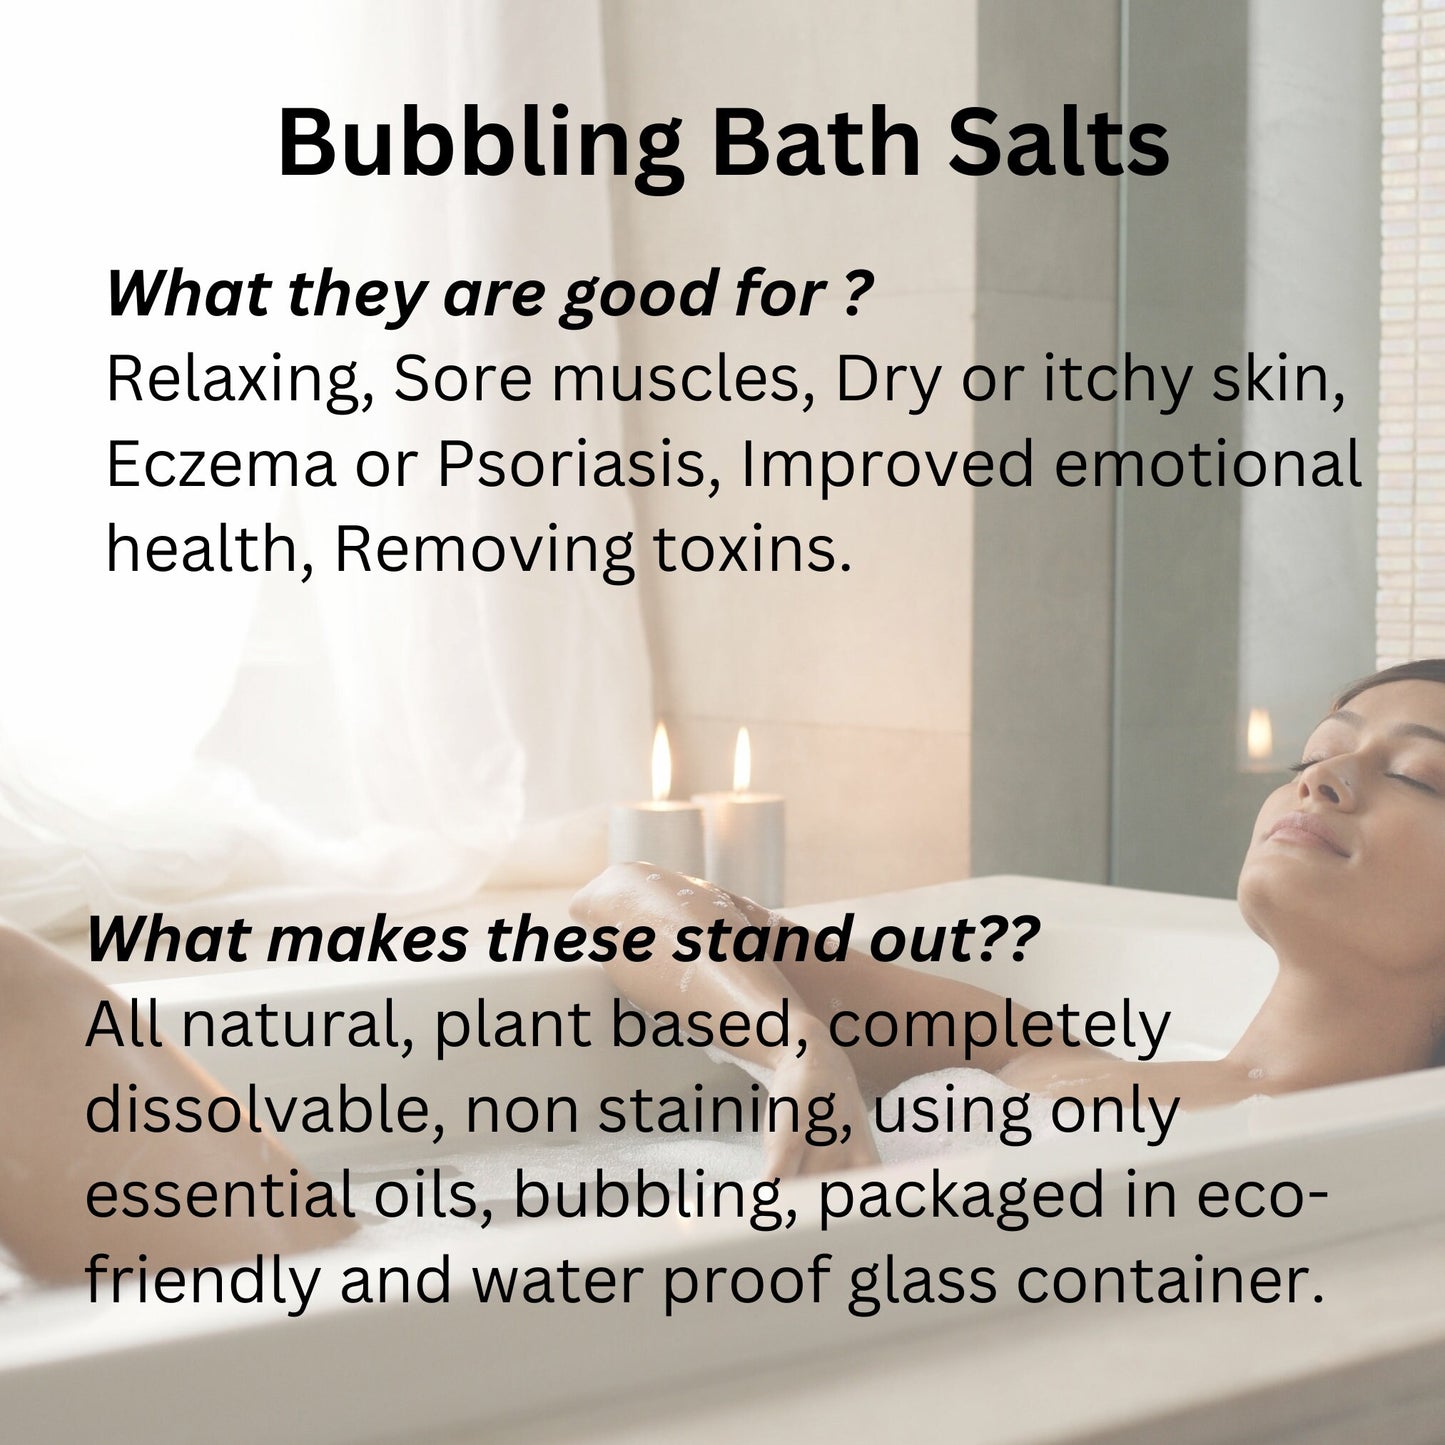 Zero Waste Single Use Bubbling Bath Salt in 4 Scents - Himalayan Salt, Epsom Salt, Colloidal Oatmeal - Travel-Friendly & Perfect for Gifting